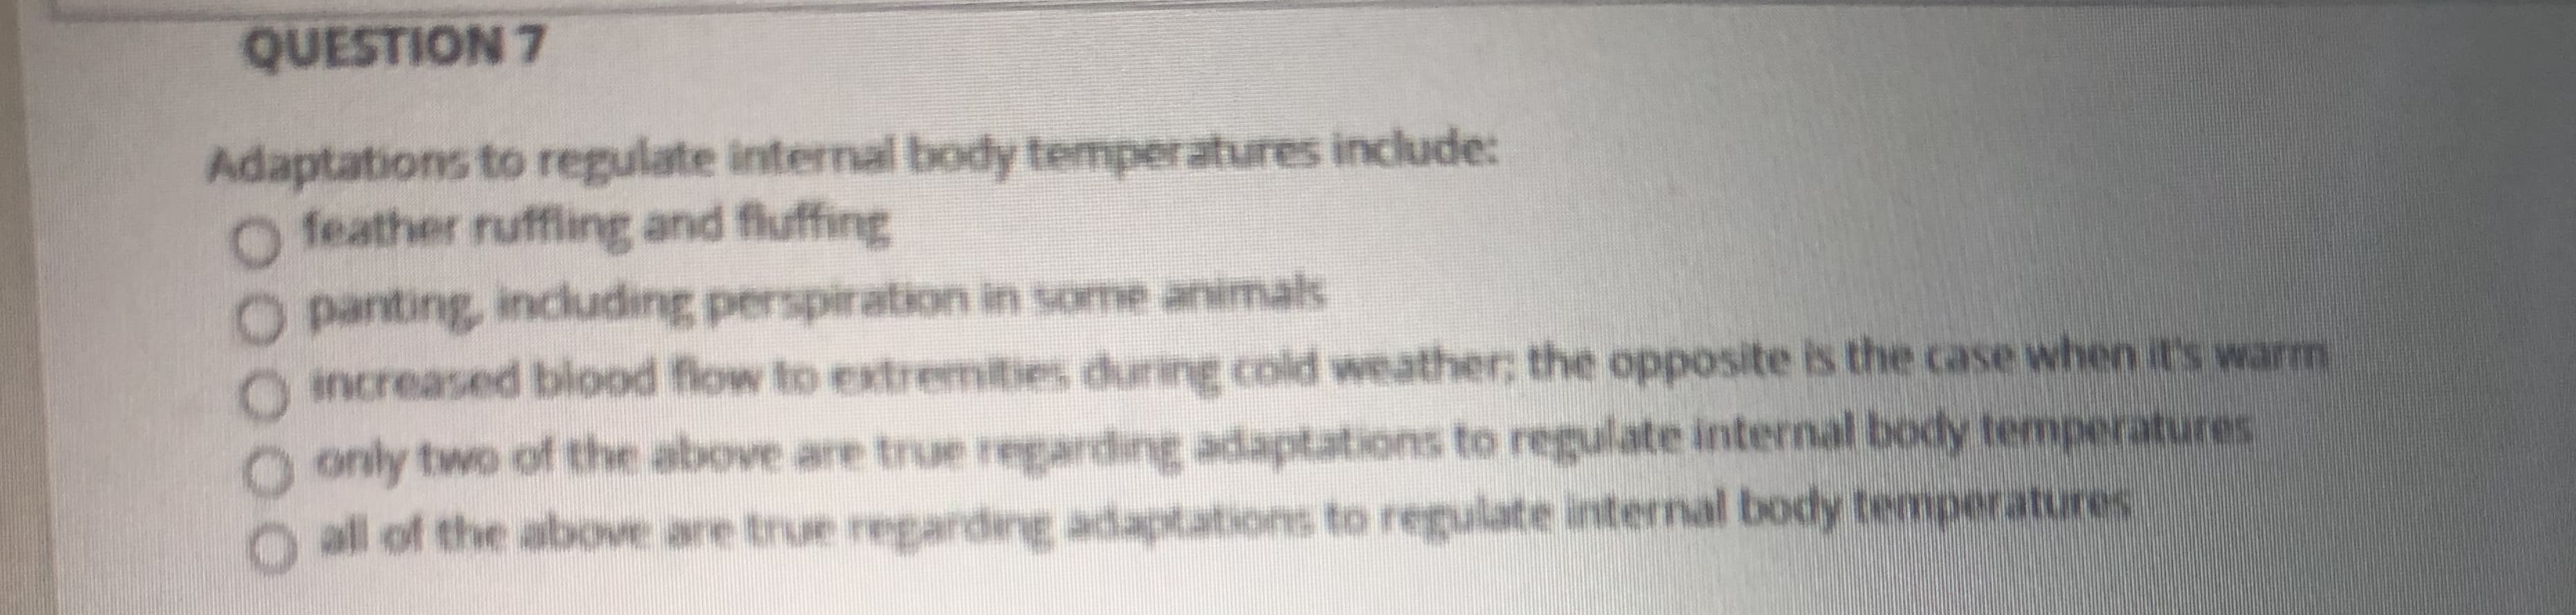 Adaptations to regulate internal body temperatures include:
